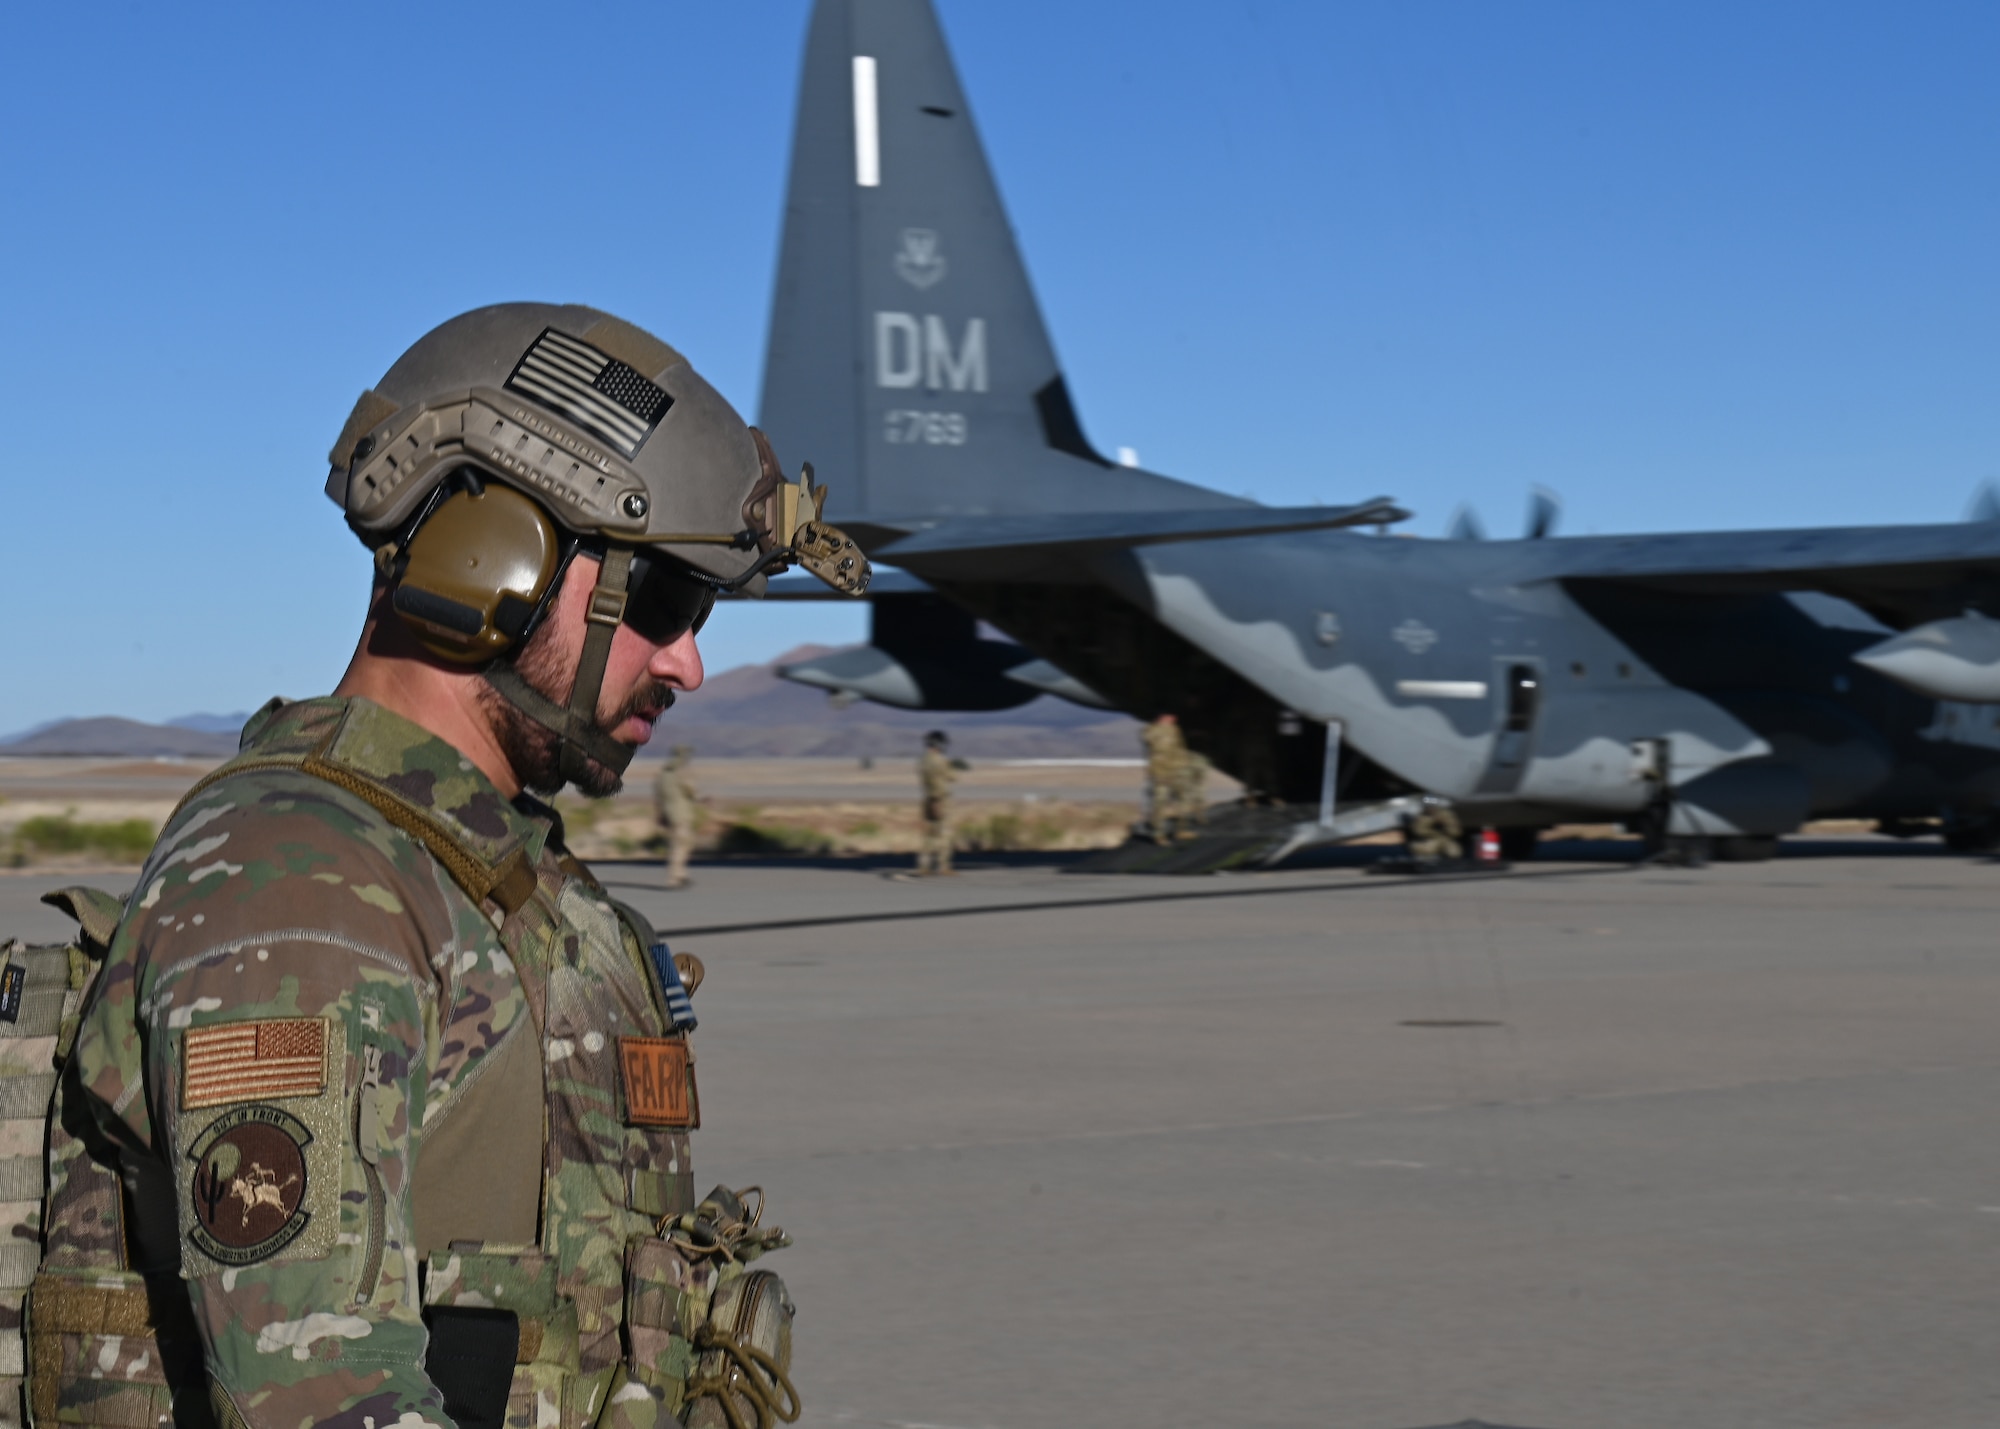 U.S. Air Force Tech. Sgt. Daniel Middaugh, 355th Logistics Readiness Squadron forward area refueling point operator, preps for FARP during Exercise Agile Angel at Fort Huachuca, Ariz., Feb. 20, 2024. Middaugh verified the simulated location was ready for the arriving aircraft. (U.S. Air Force photo by Staff Sgt. Abbey Rieves)